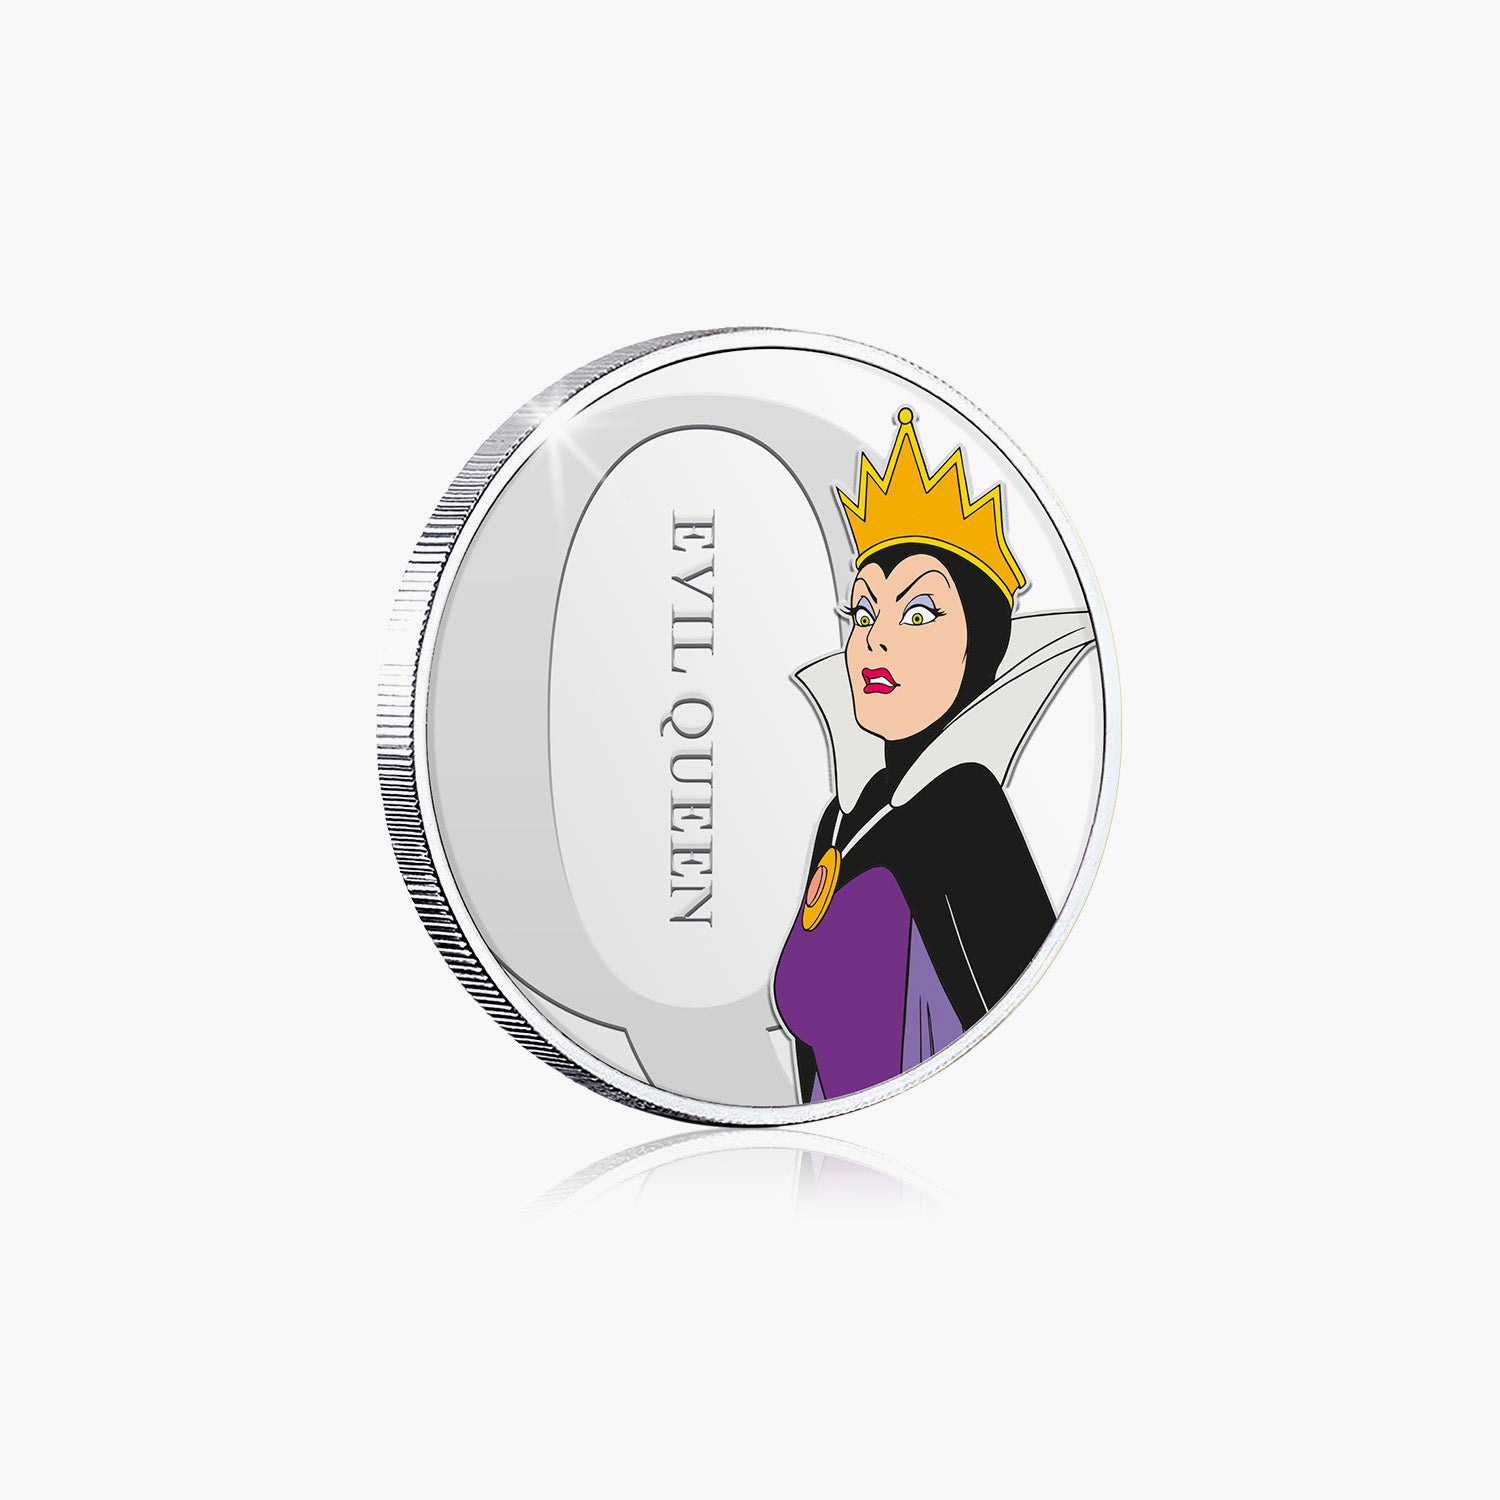 Q is for Evil Queen Silver-Plated Full Colour Commemorative